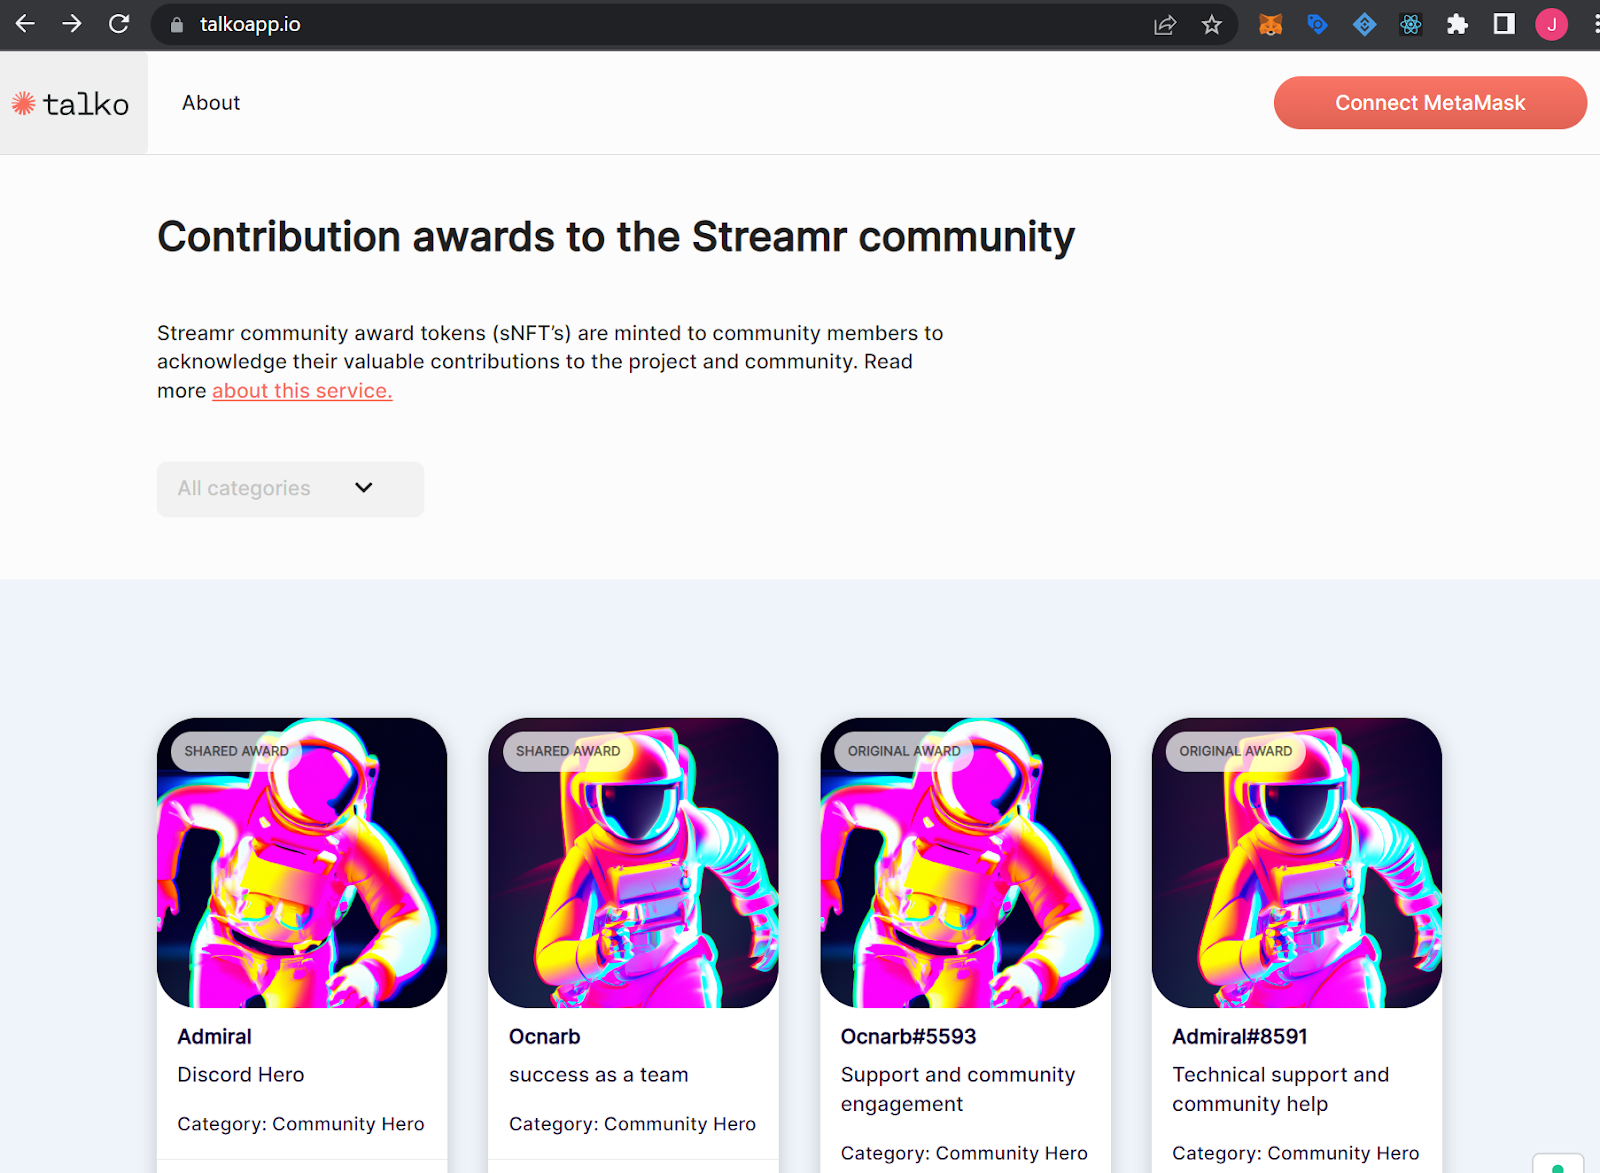 Streamr Awards are here! Contribute and earn unique sNFTs